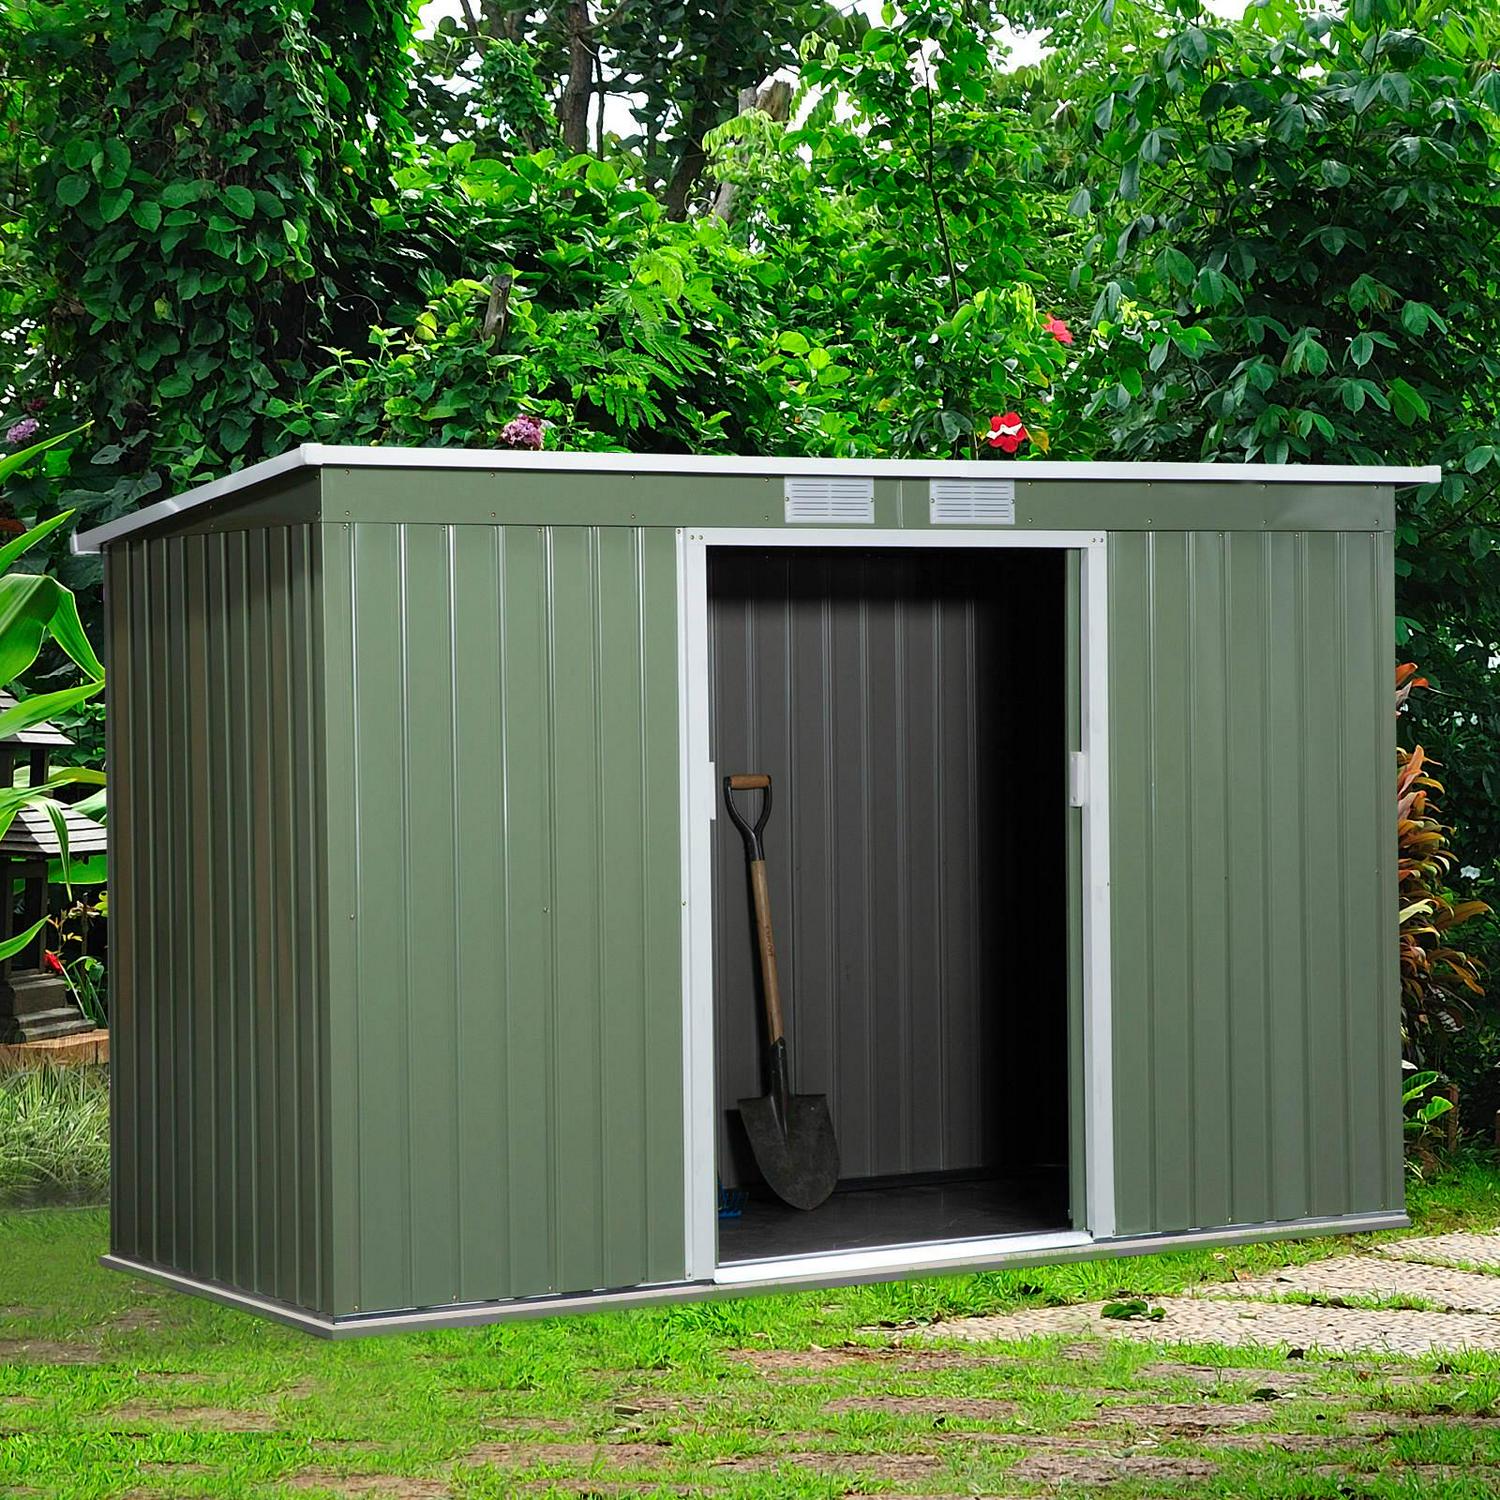 Corrugated Garden Metal Storage Shed Outdoor Equipment Tool Box With Foundation Ventilation And Doors Light Green 9ft X 4.25ft